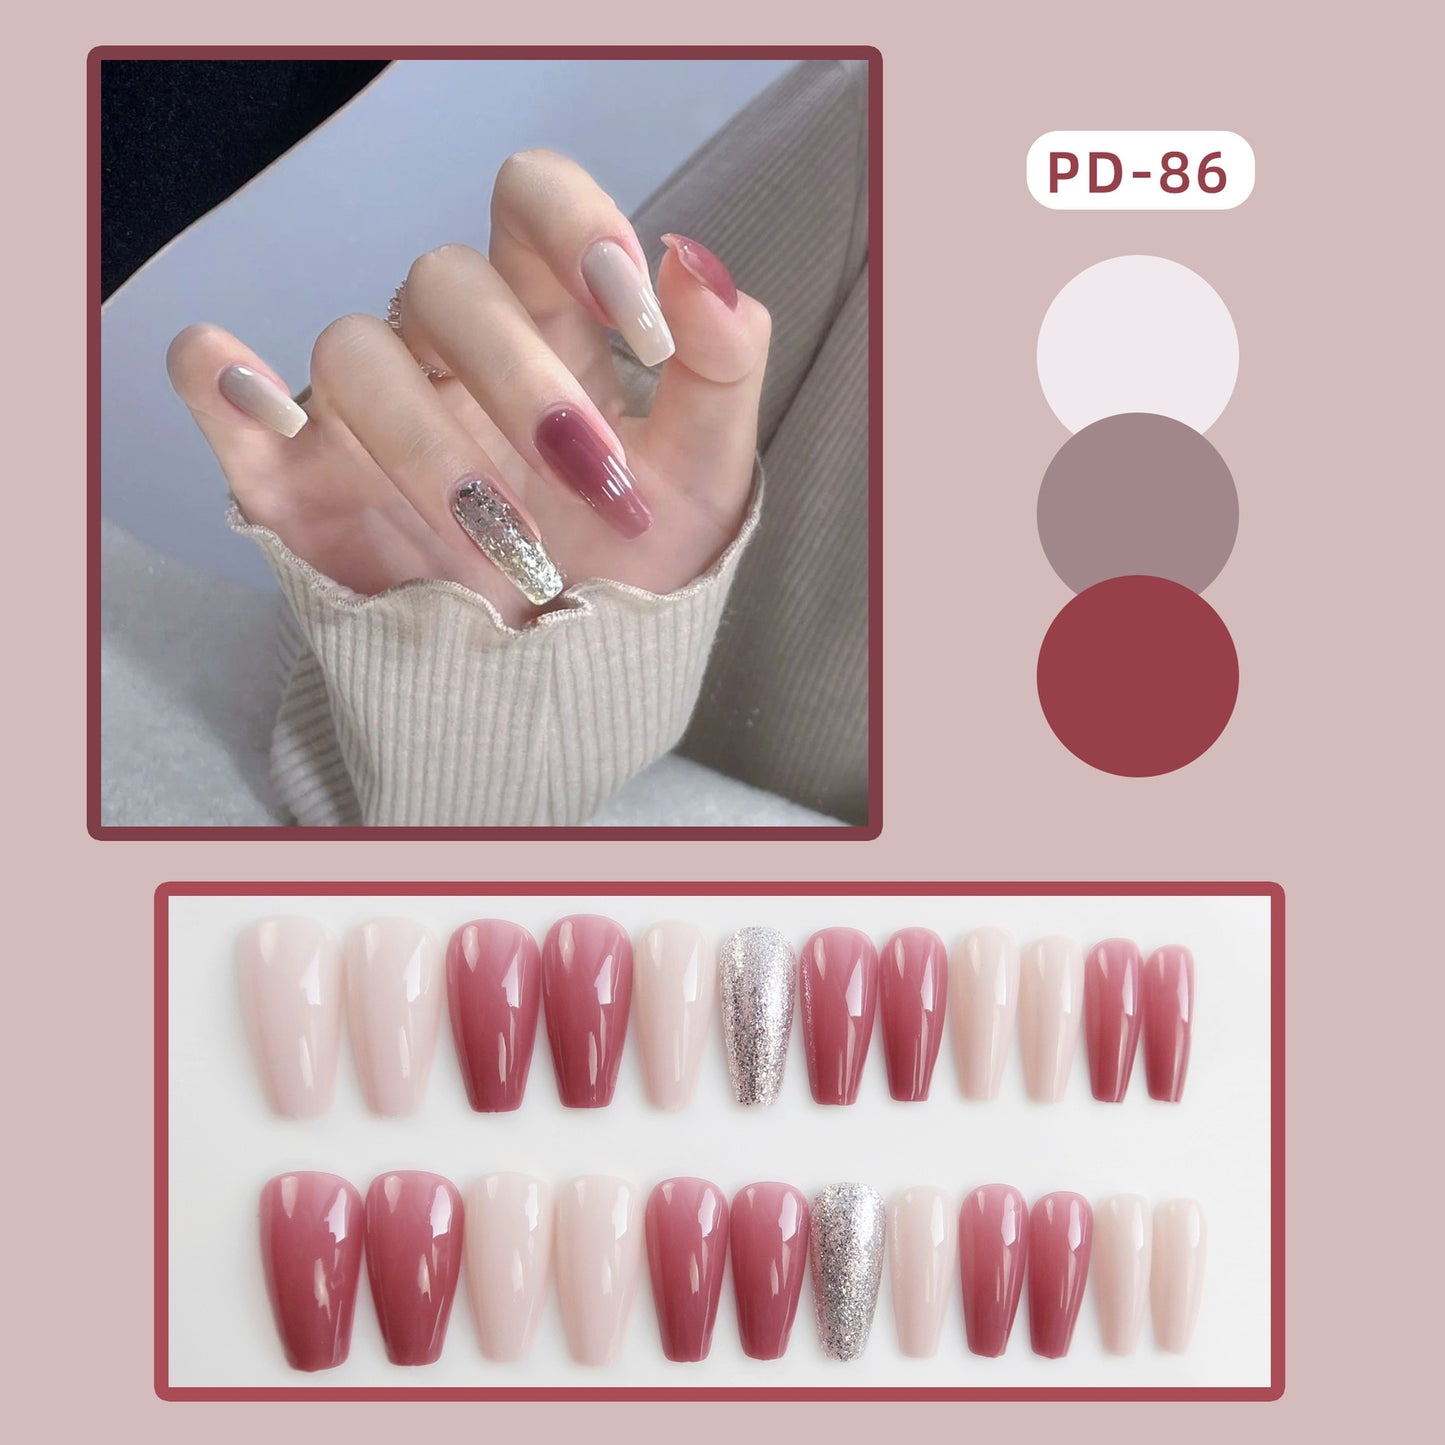 24Pcs Coffin Pink False Nails 3D Heart Diamond y2k Mid-length Fake Nails Full Finished Tulip Pattern Fake Nail Patches For Girls